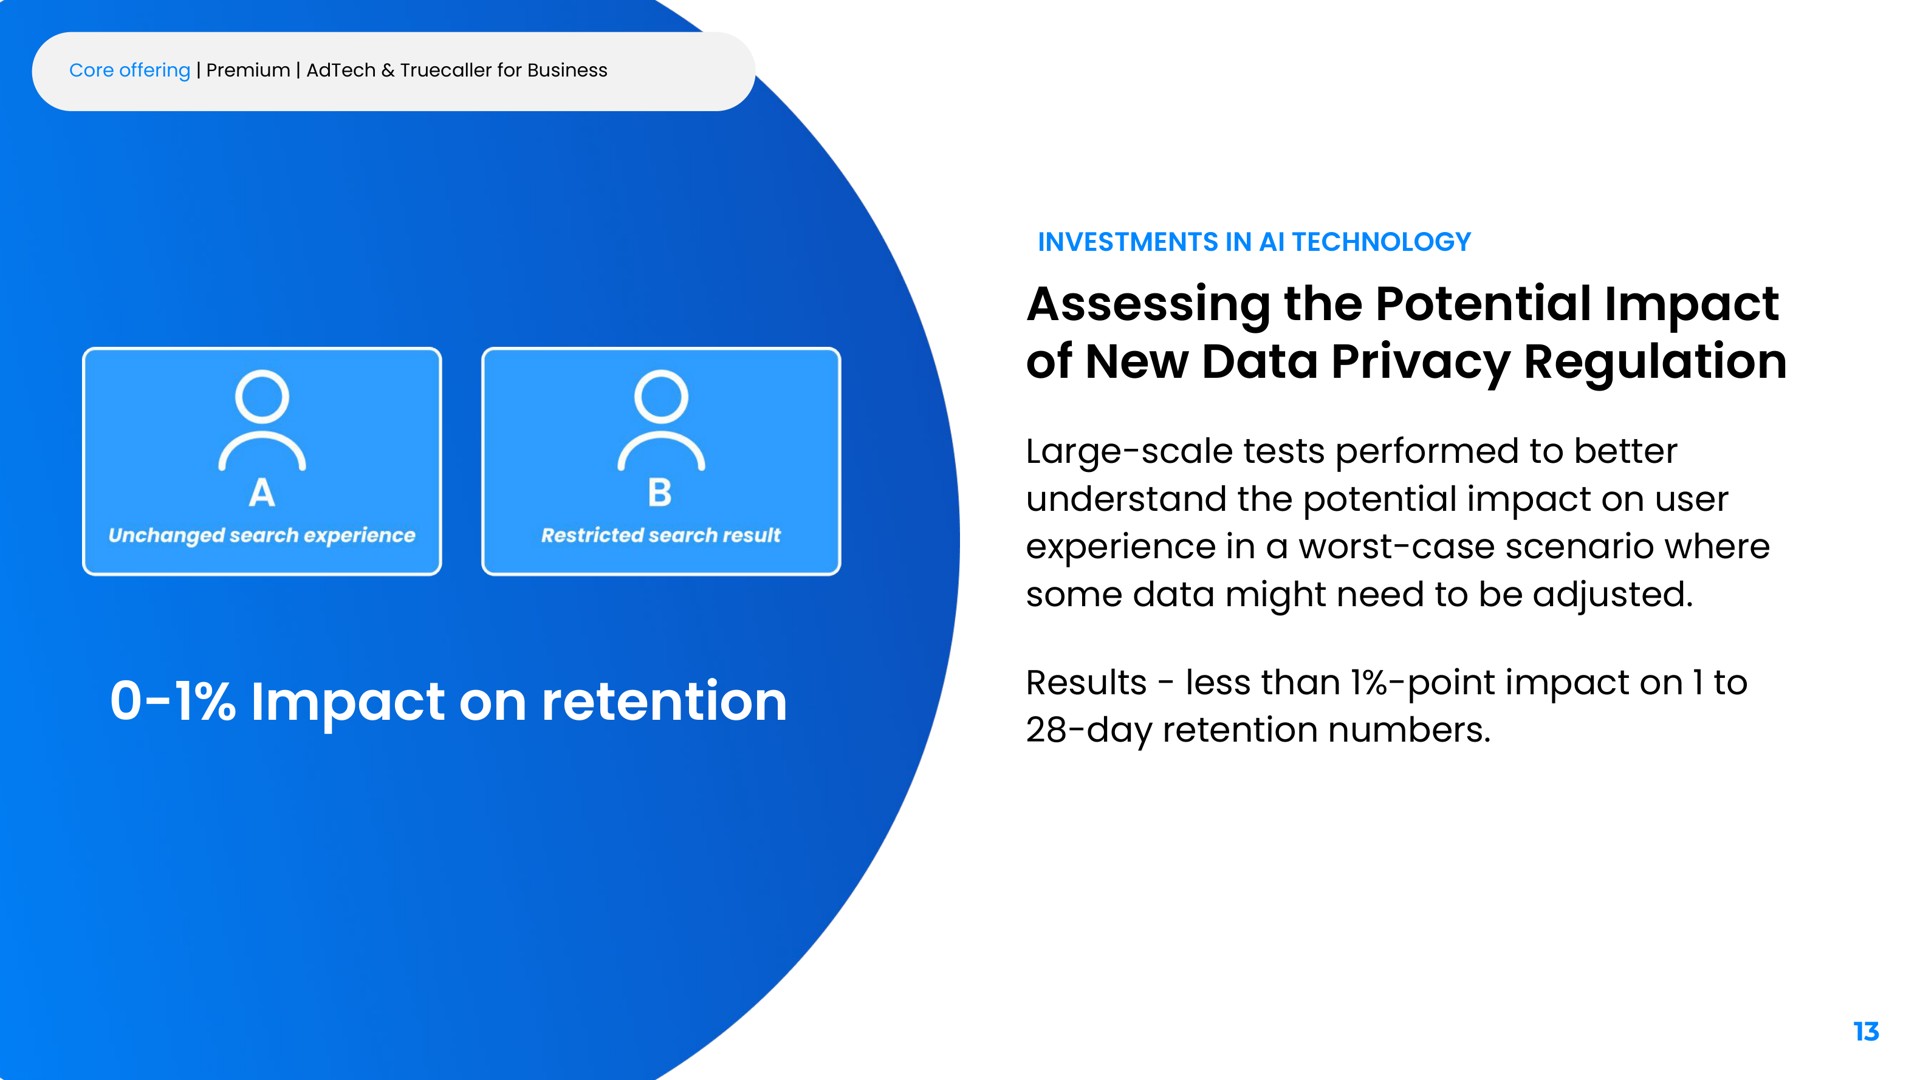 assessing the potential impact of new data privacy regulation large scale tests performed to better understand the potential impact on user experience in a worst case scenario where some data might need to be adjusted impact on retention results less than point impact on to day retention numbers | Truecaller